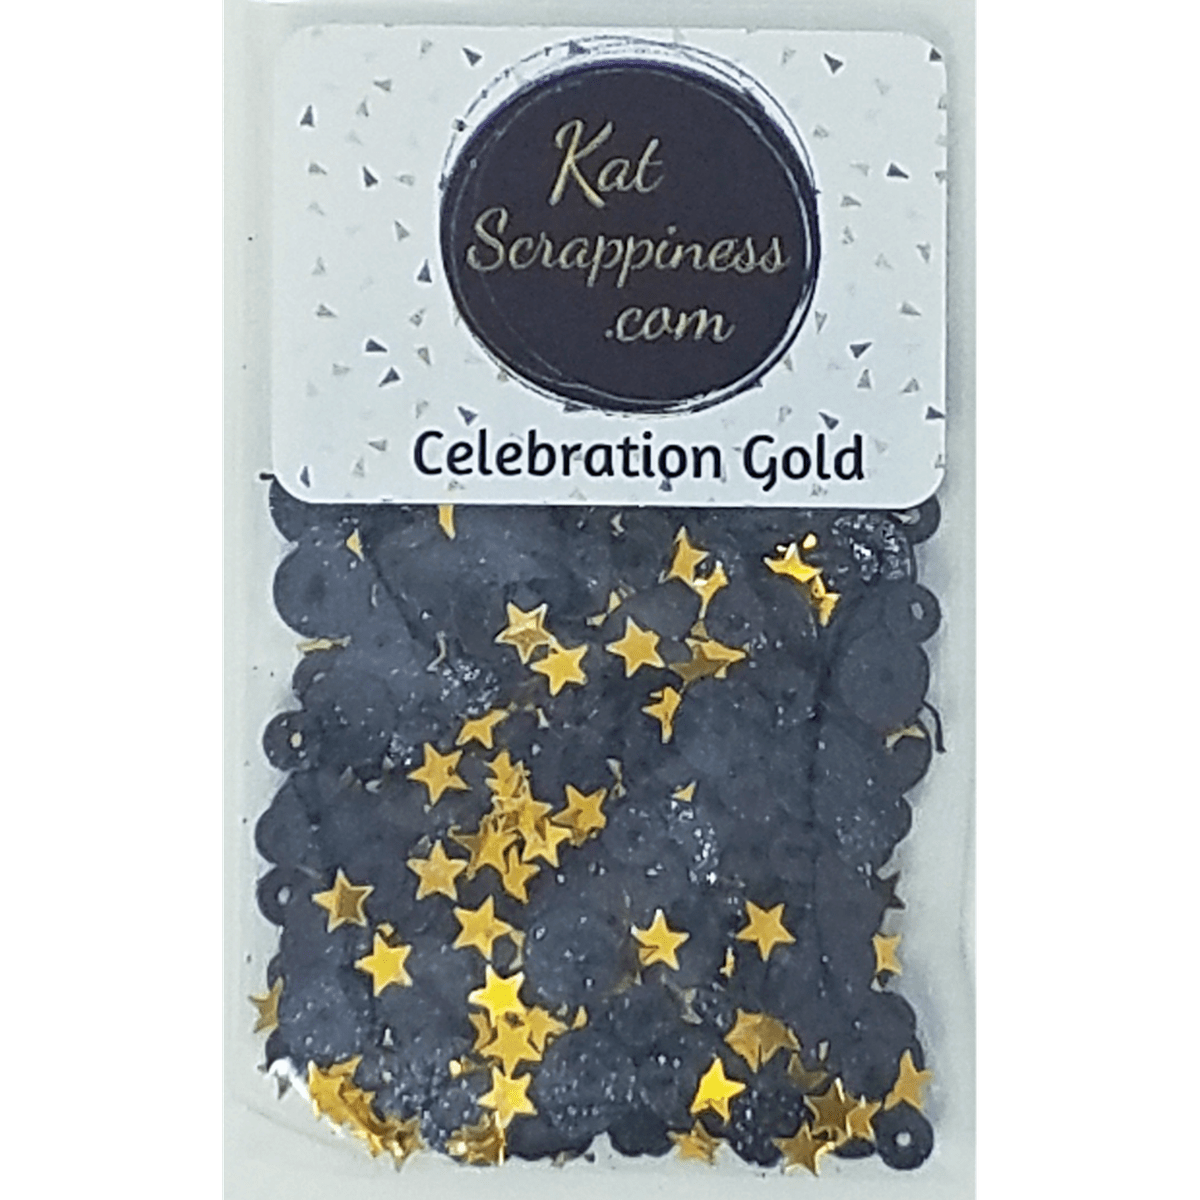 NEW Celebration Gold Sequin Mix - Kat Scrappiness